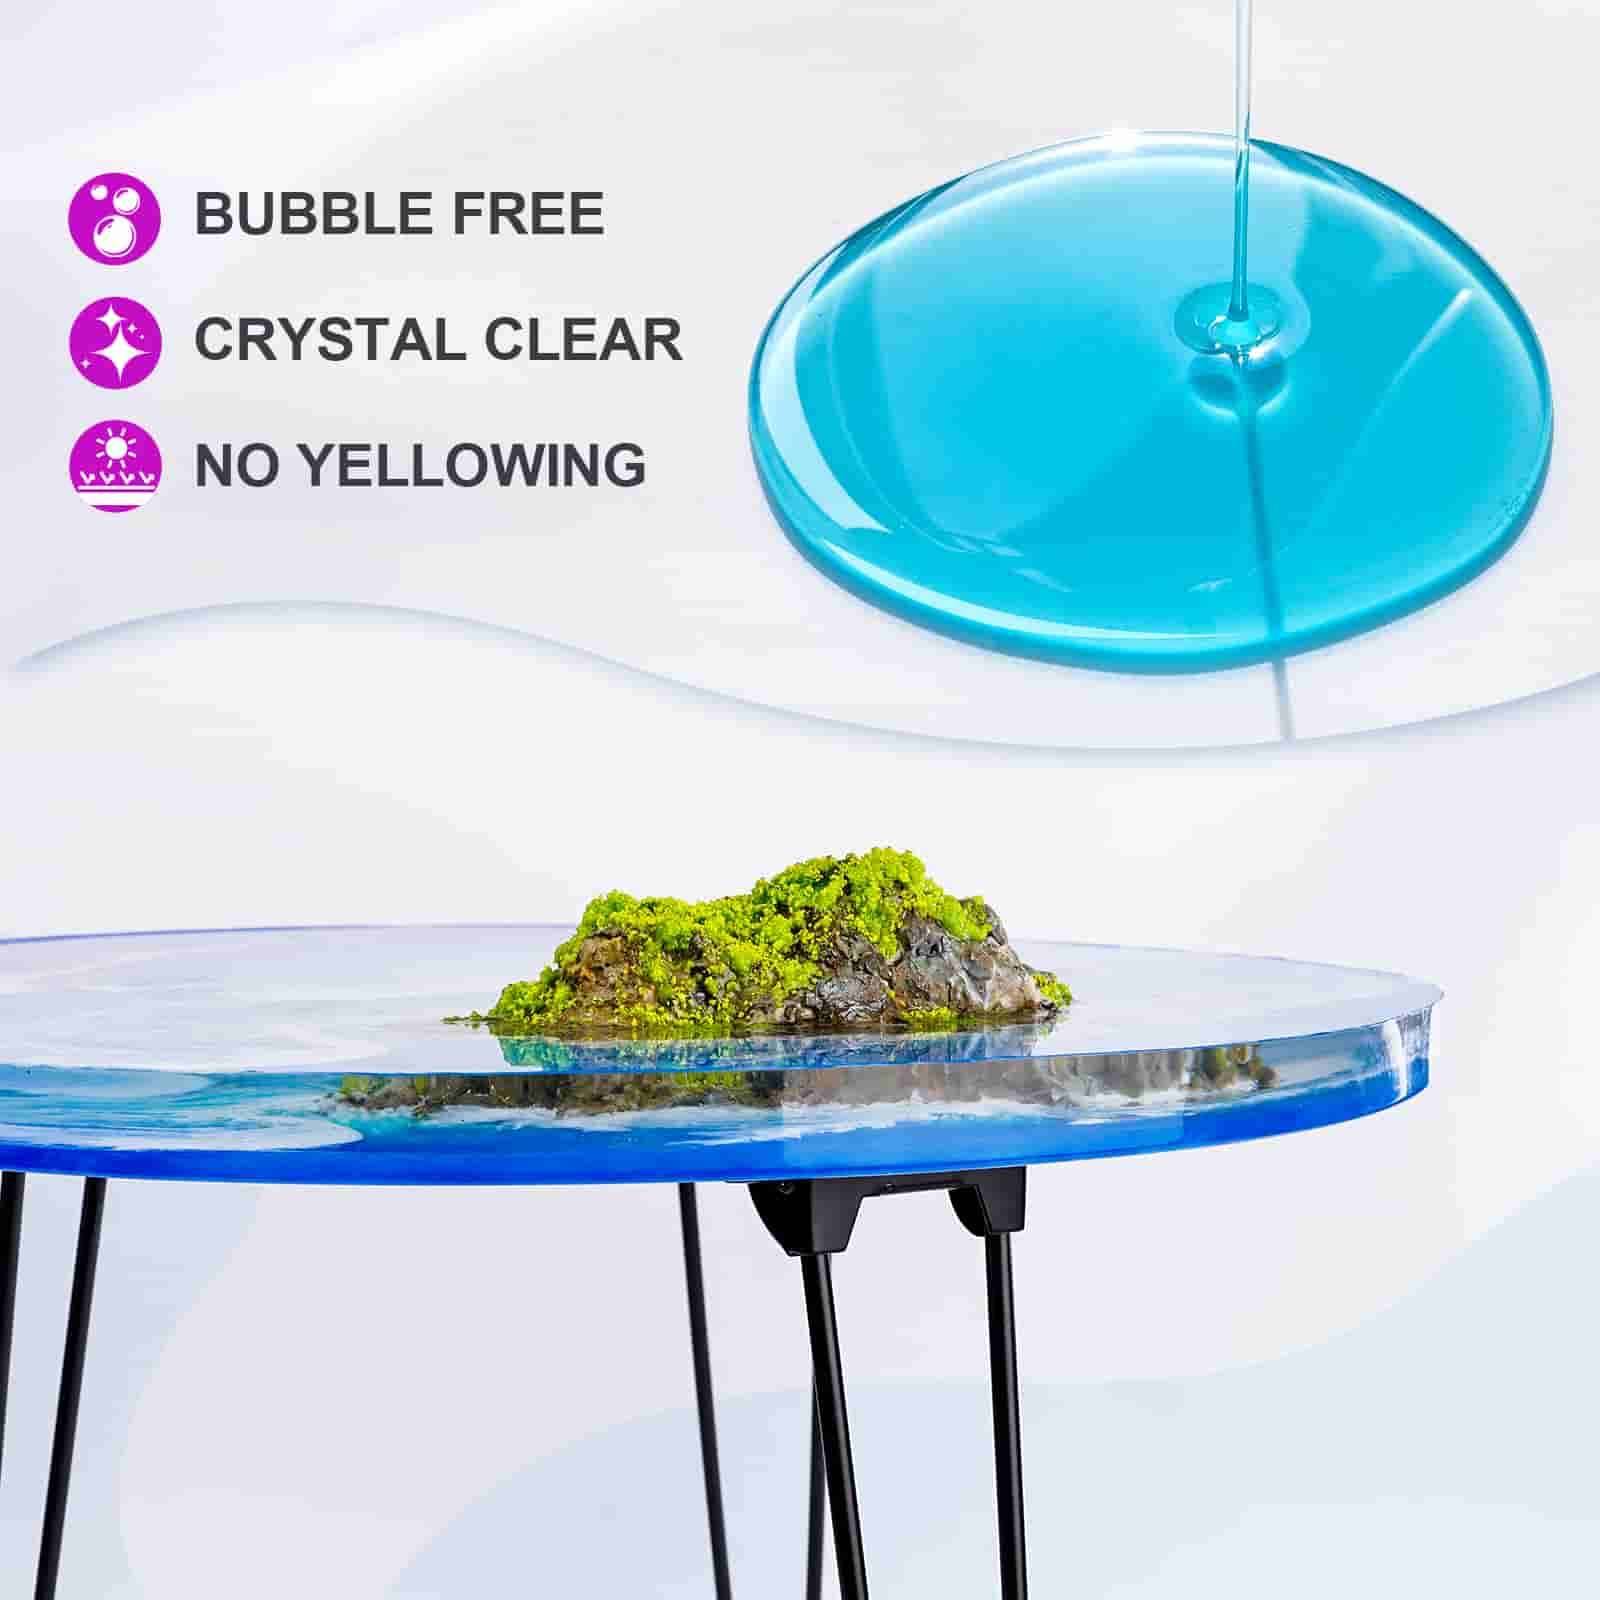 LET'S RESIN 2 Part Clear Epoxy Resin, 44OZ Crystal Clear Epoxy